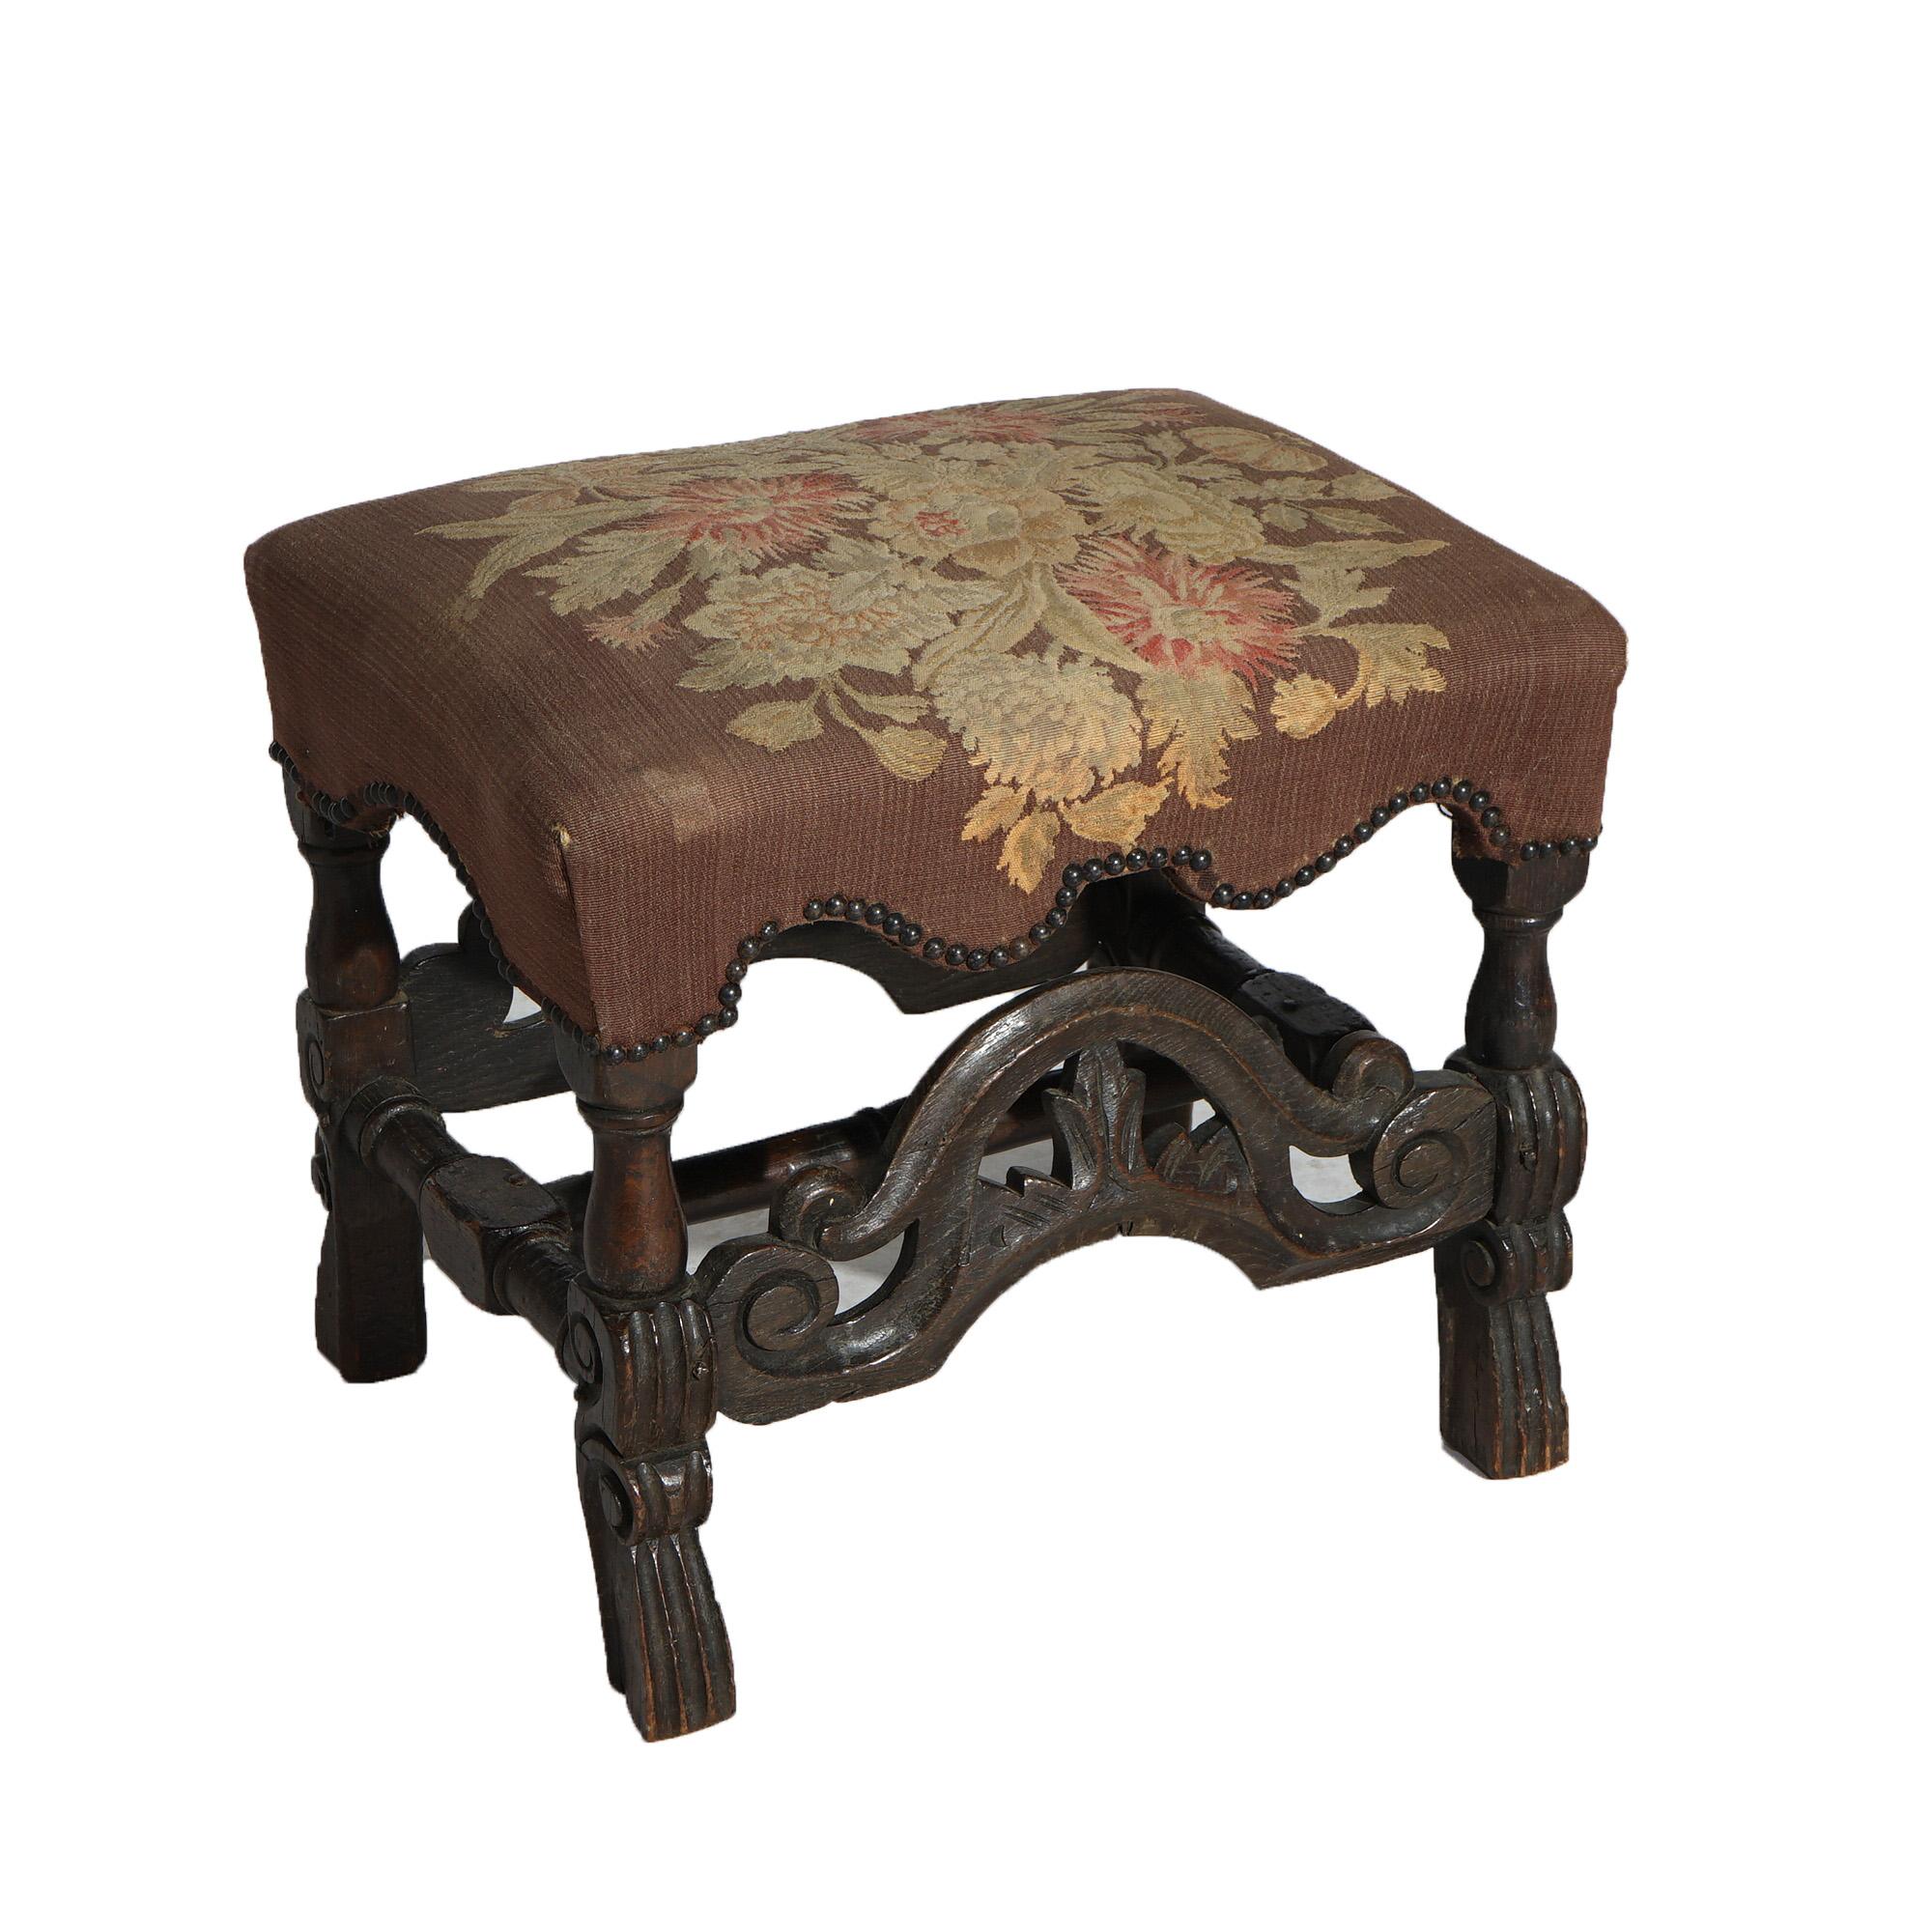 Early Antique English Carved Walnut & Needlepoint Bench (Stool) Circa 1690 For Sale 8